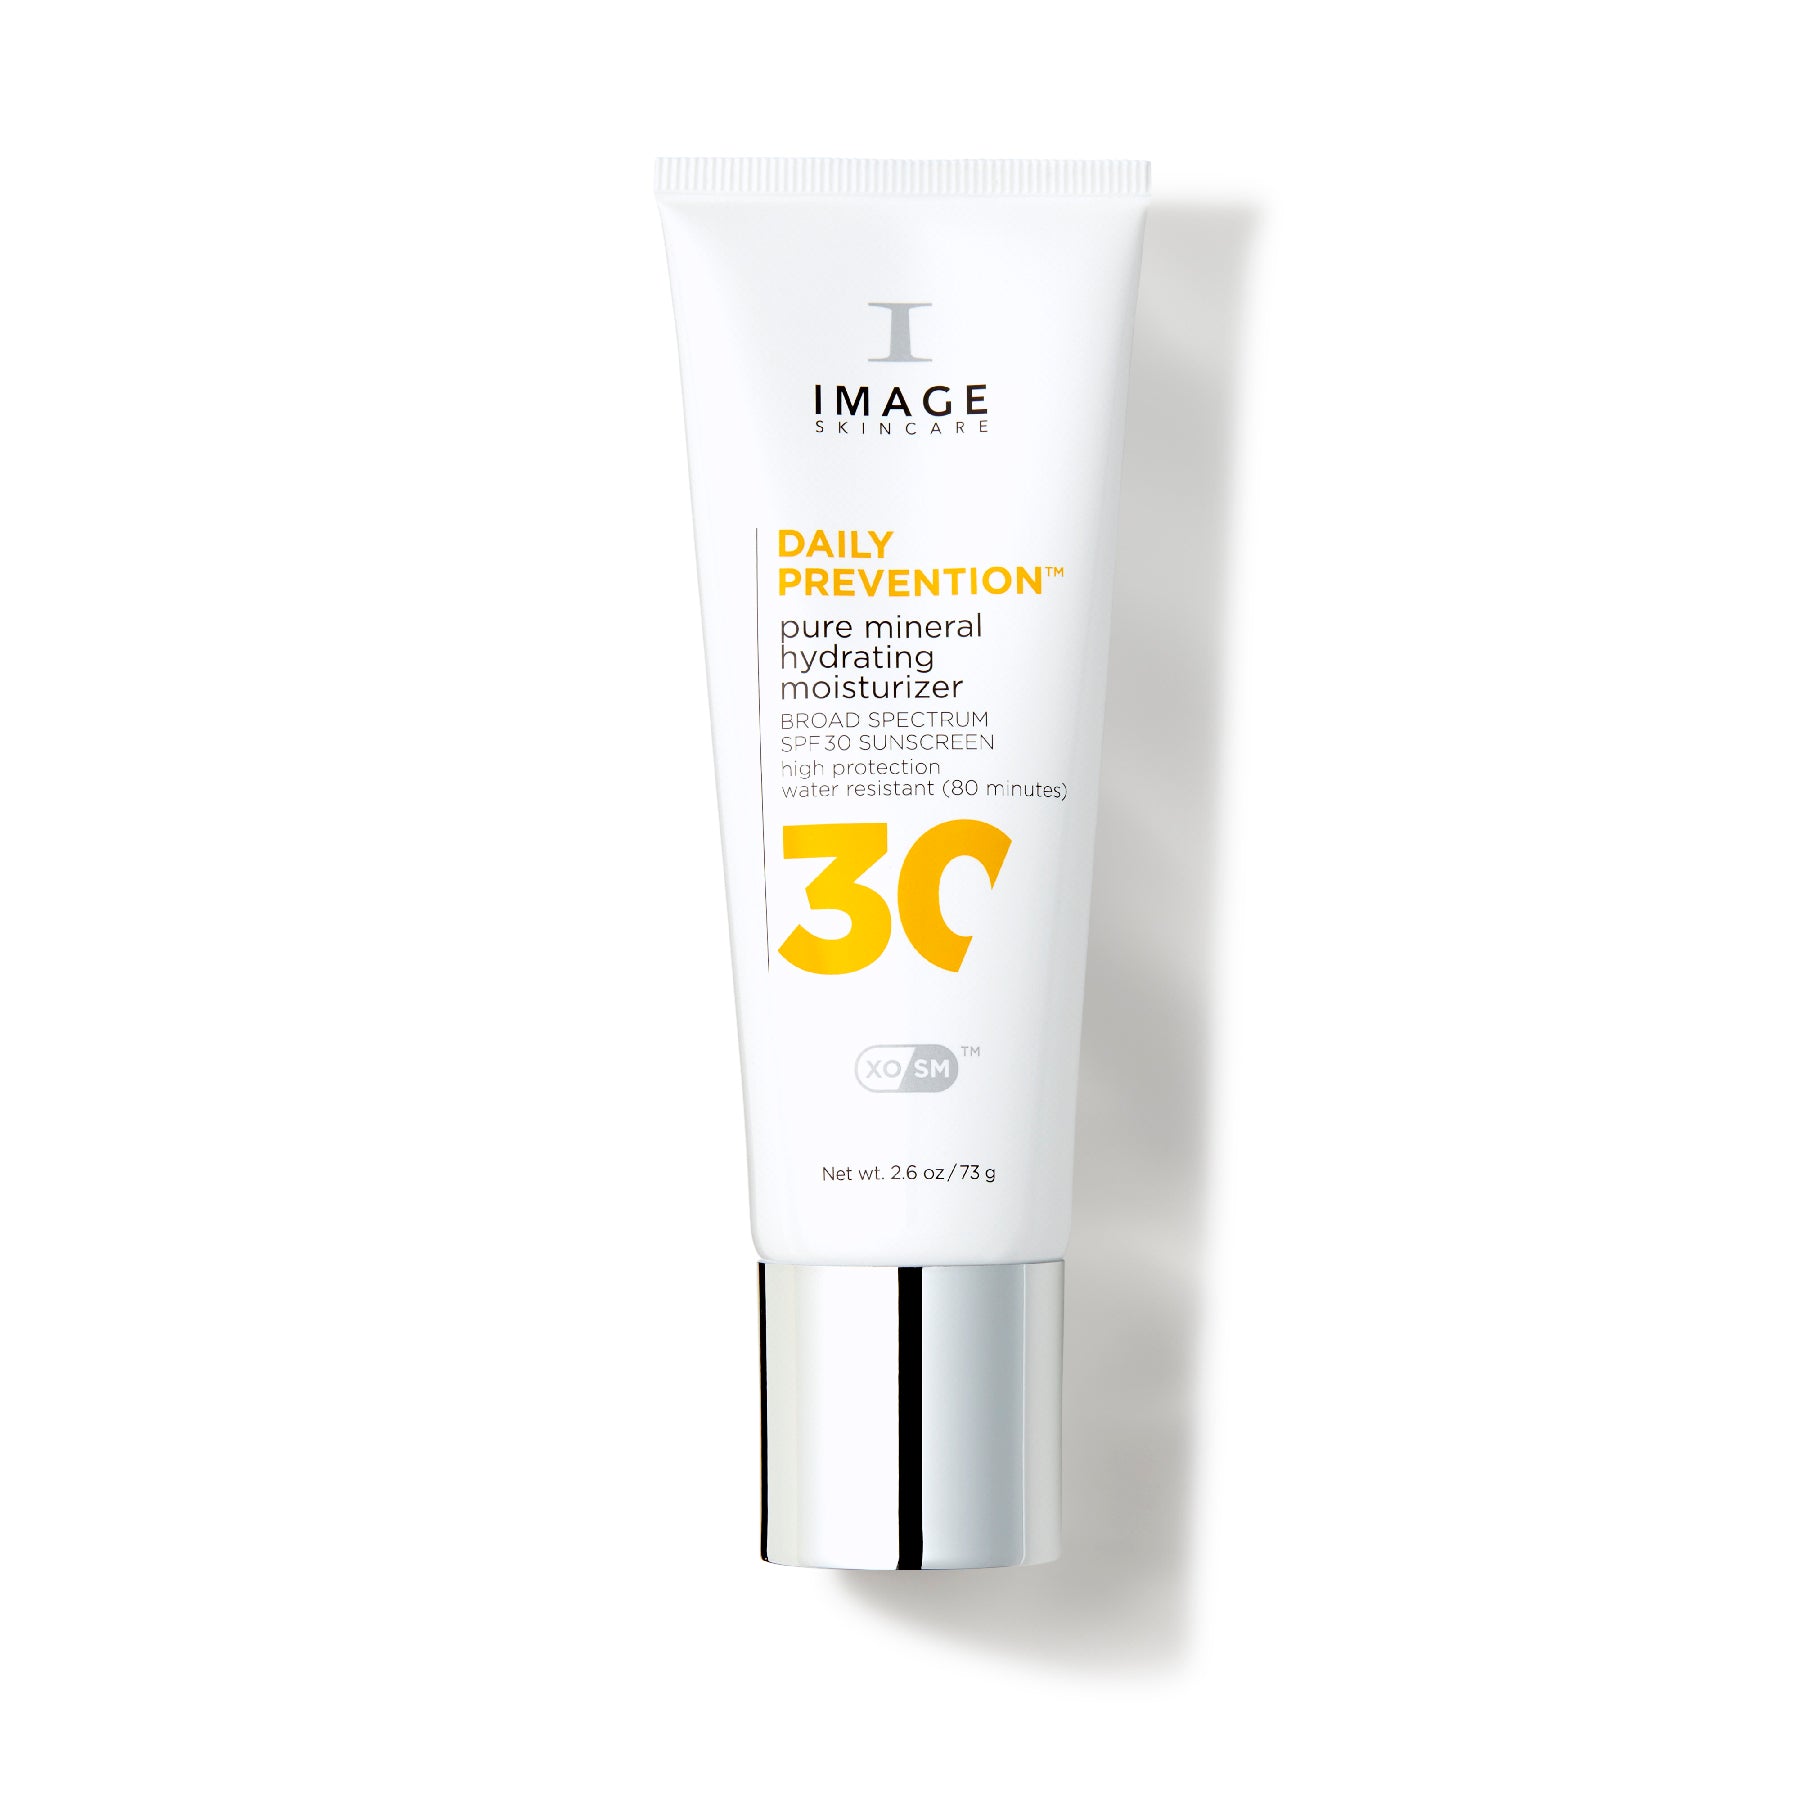 DAILY PREVENTION - Pure Mineral Hydrating Moisturizer SPF30